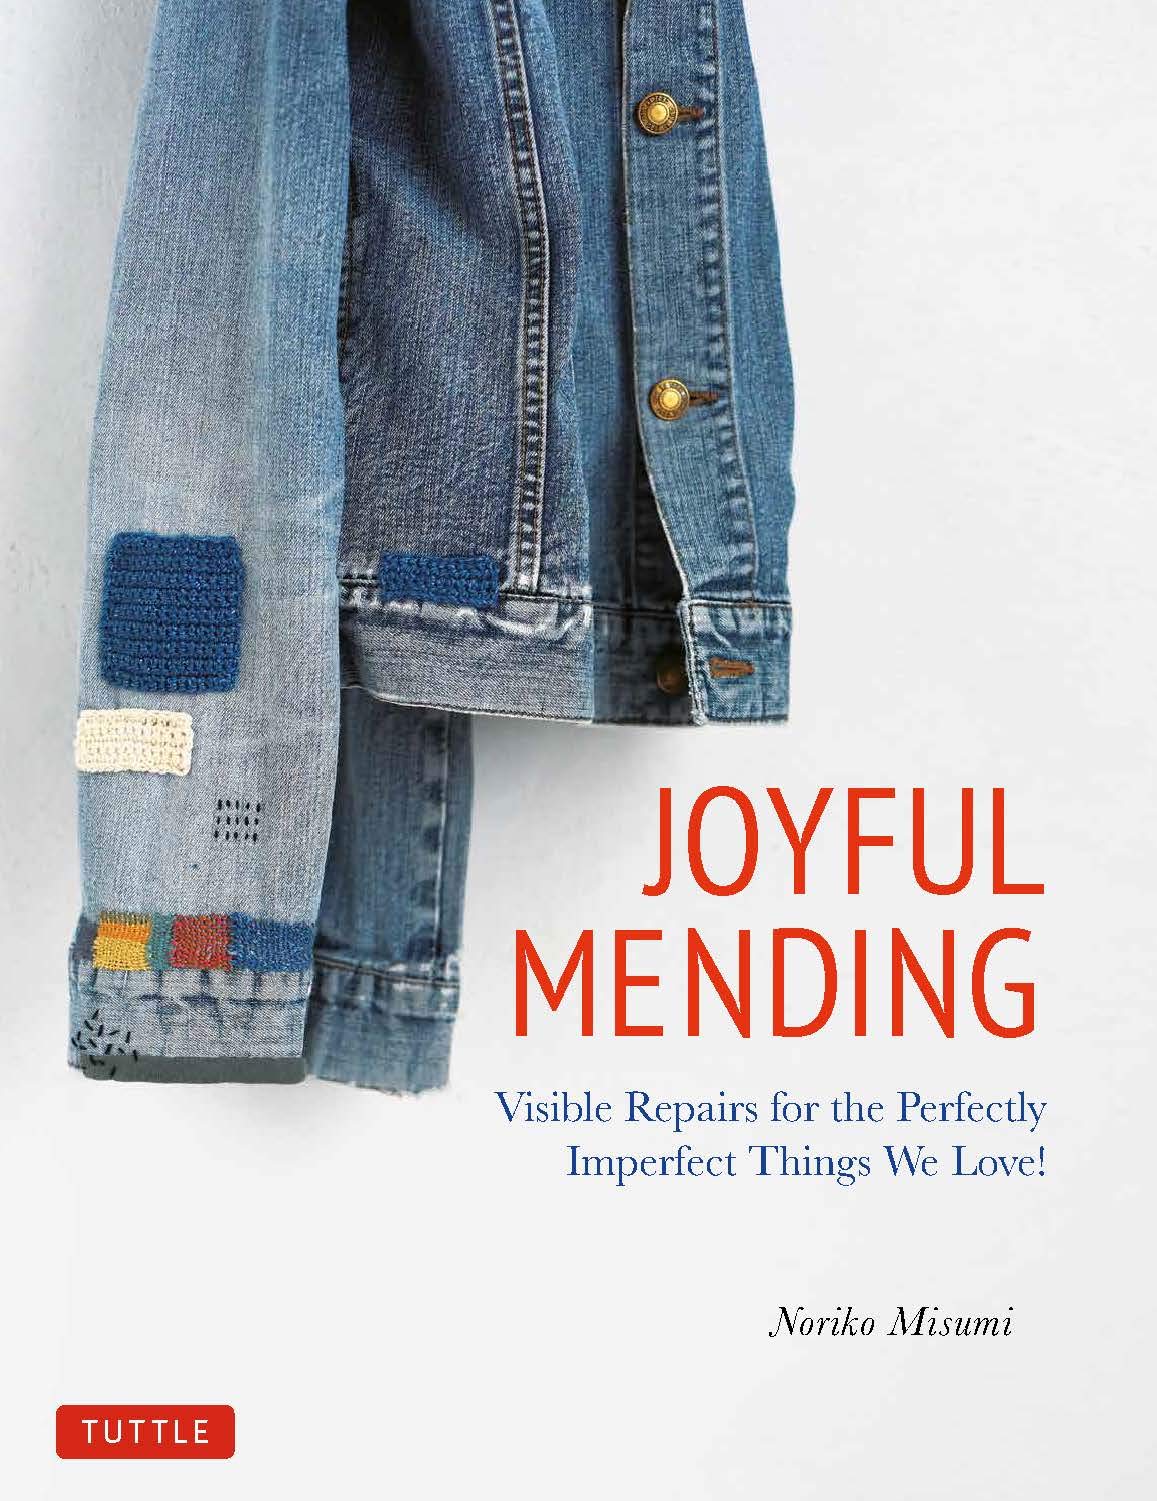 Joyful Mending: Visible Repairs for the Perfectly Imperfect Things We Love!